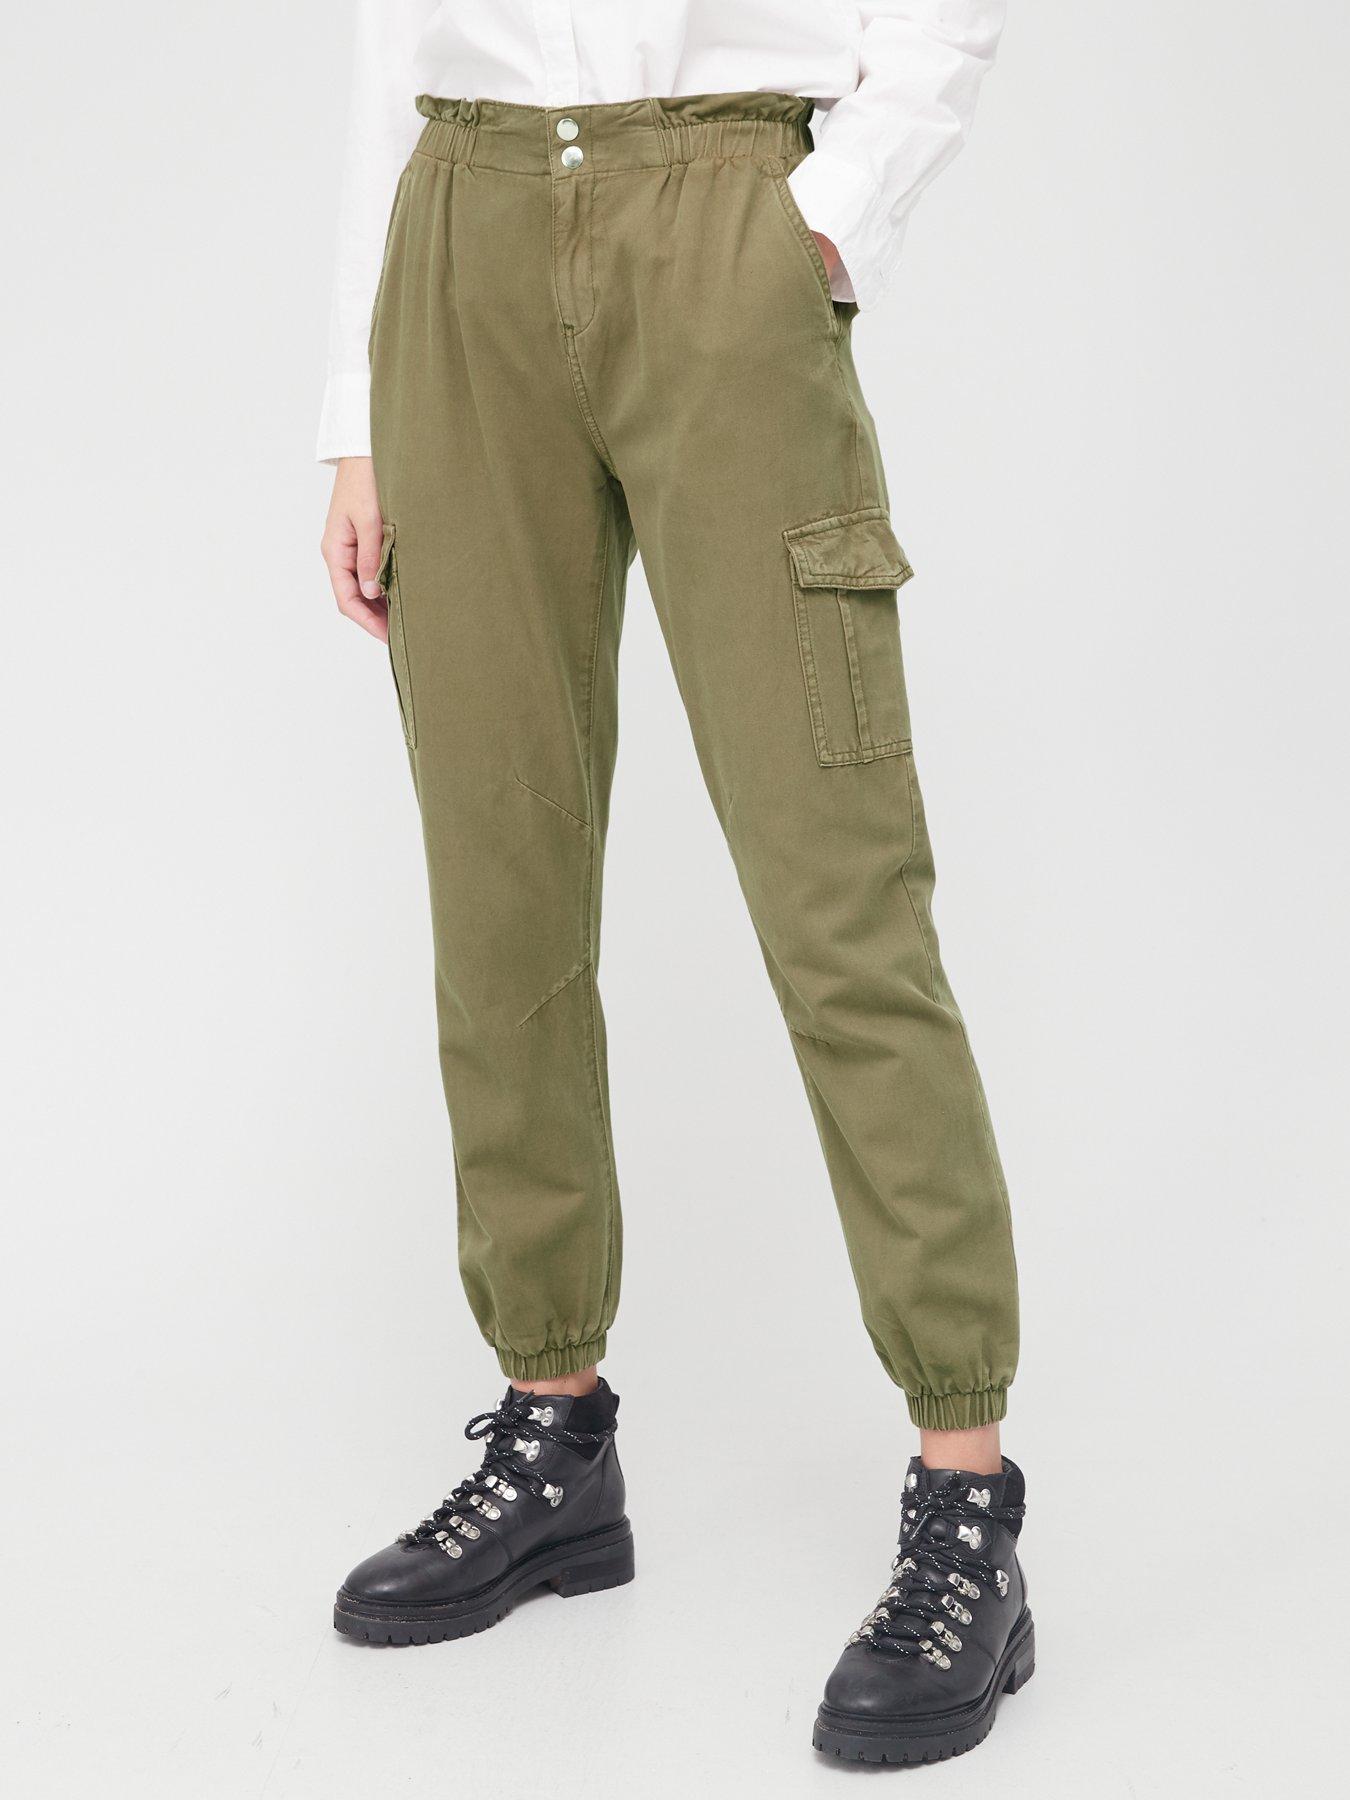 womens green utility trousers